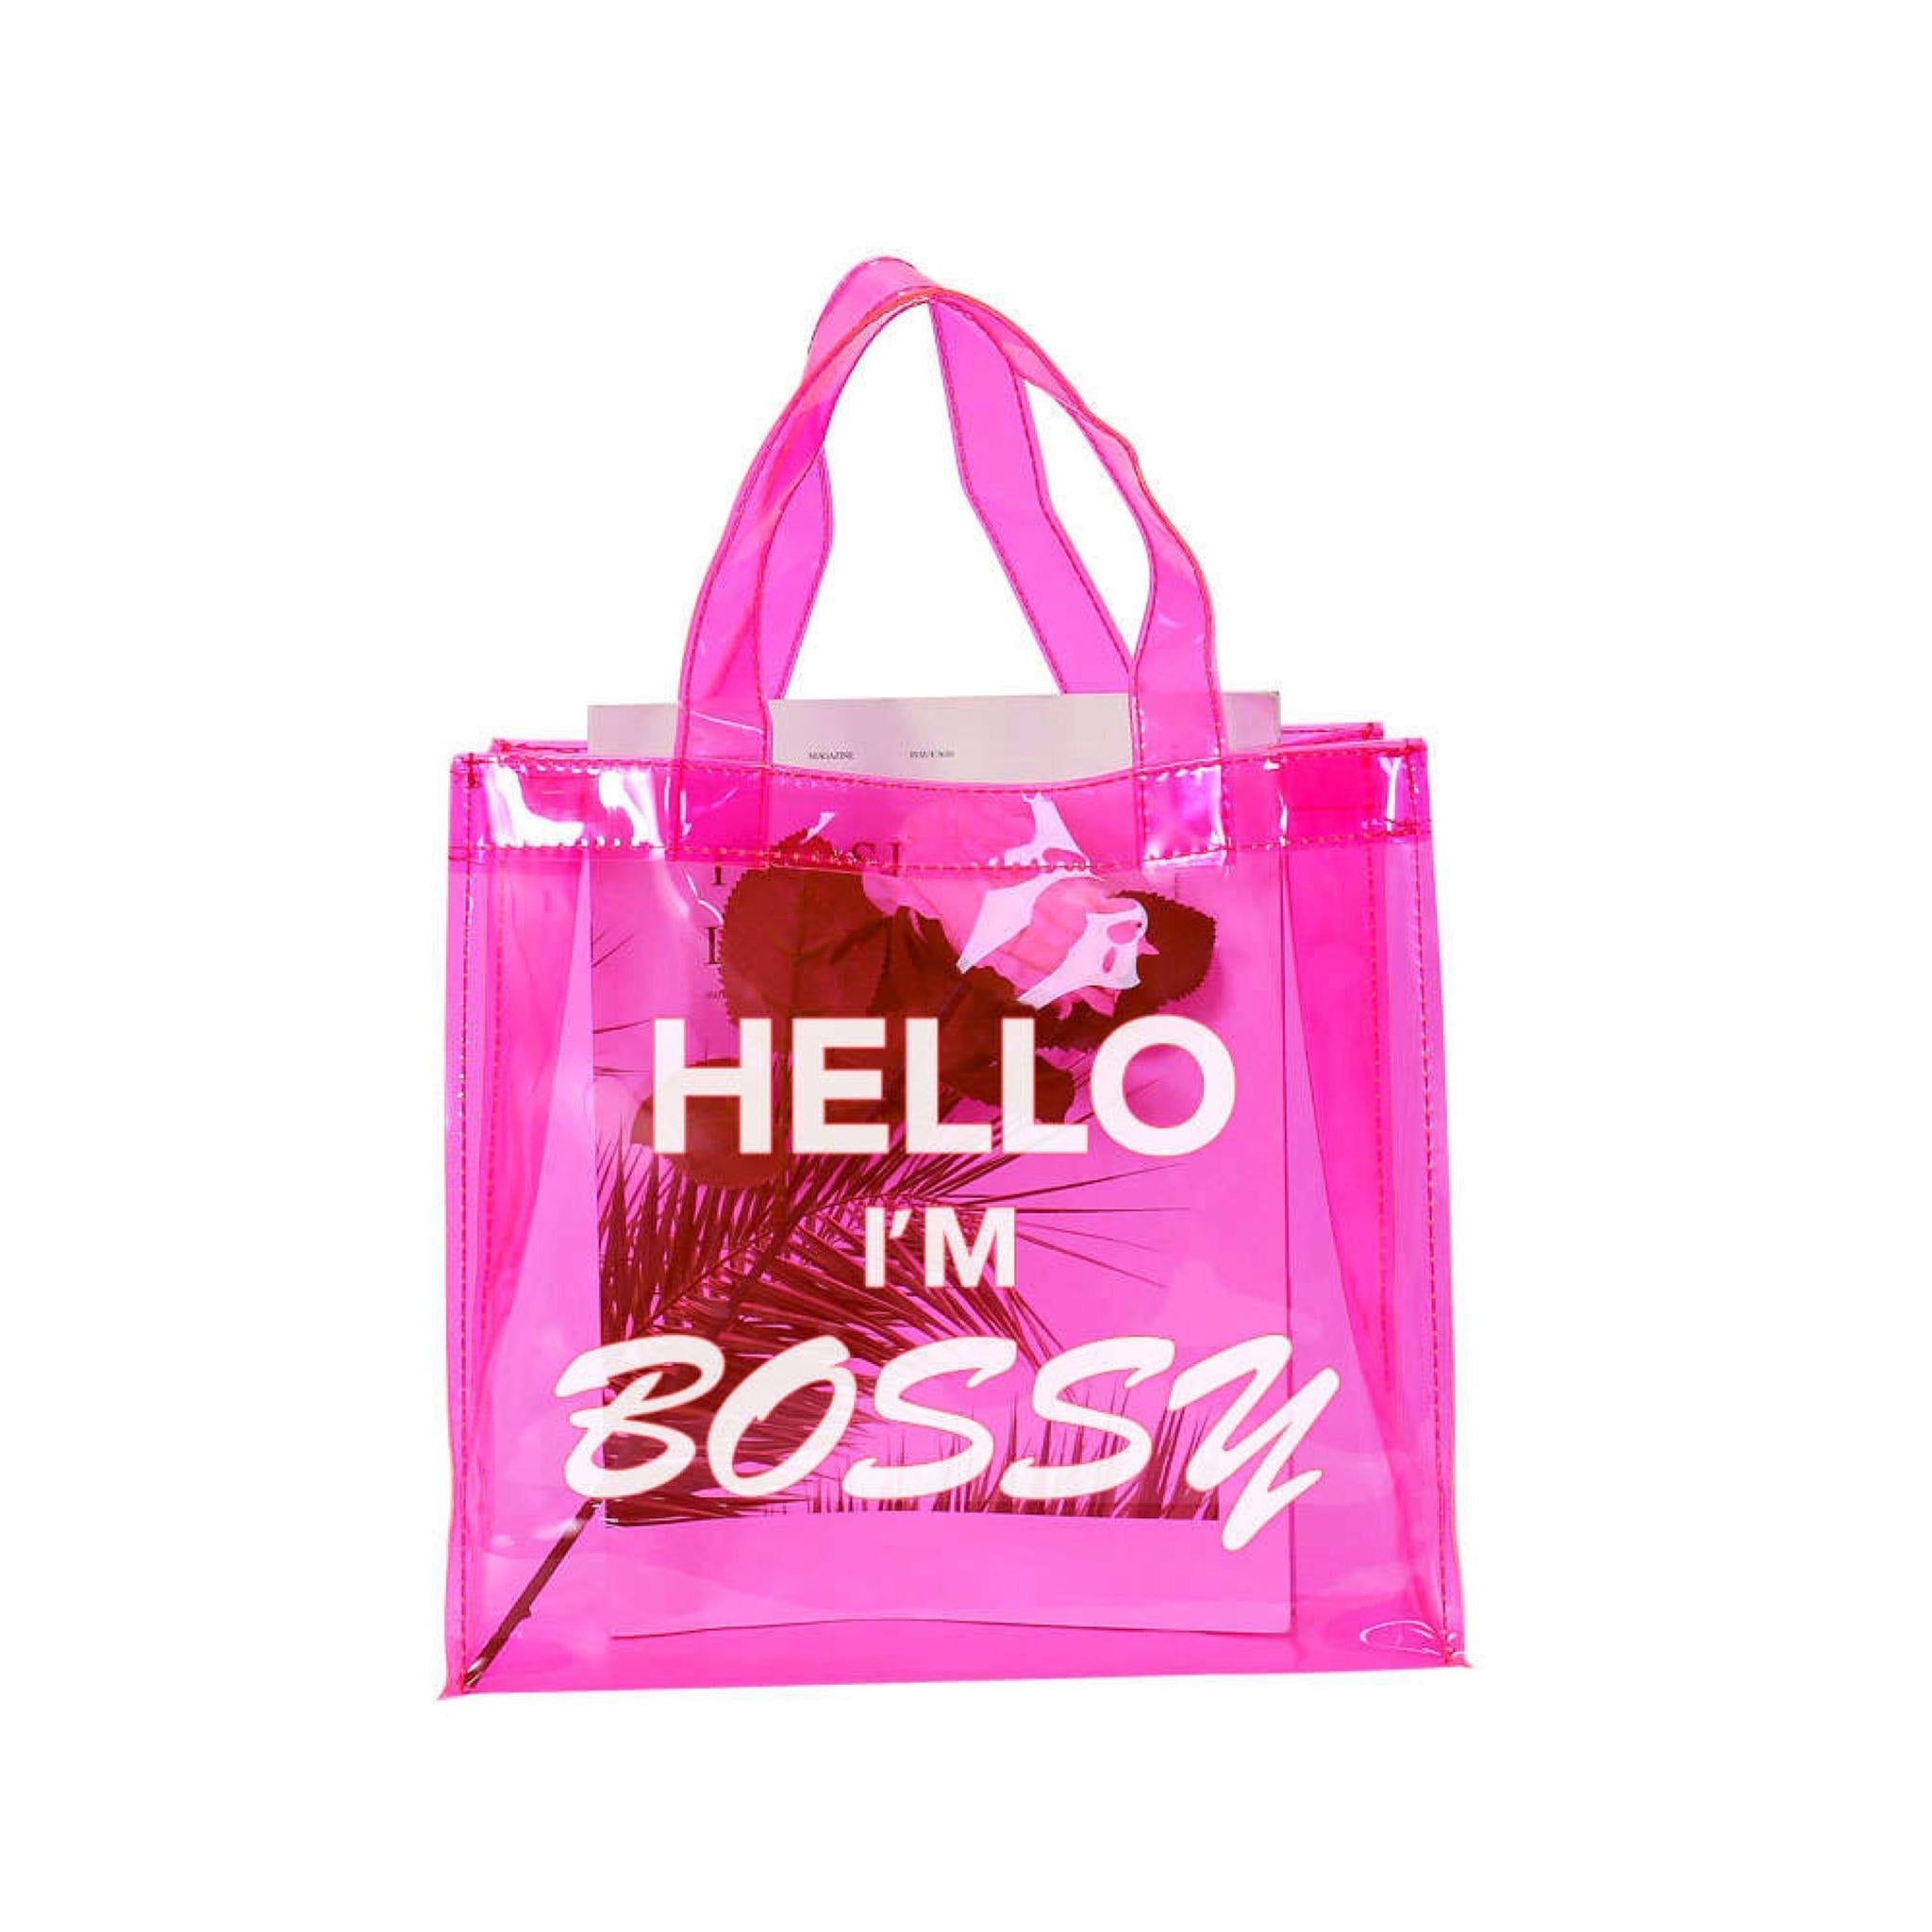 Statement Jelly Tote